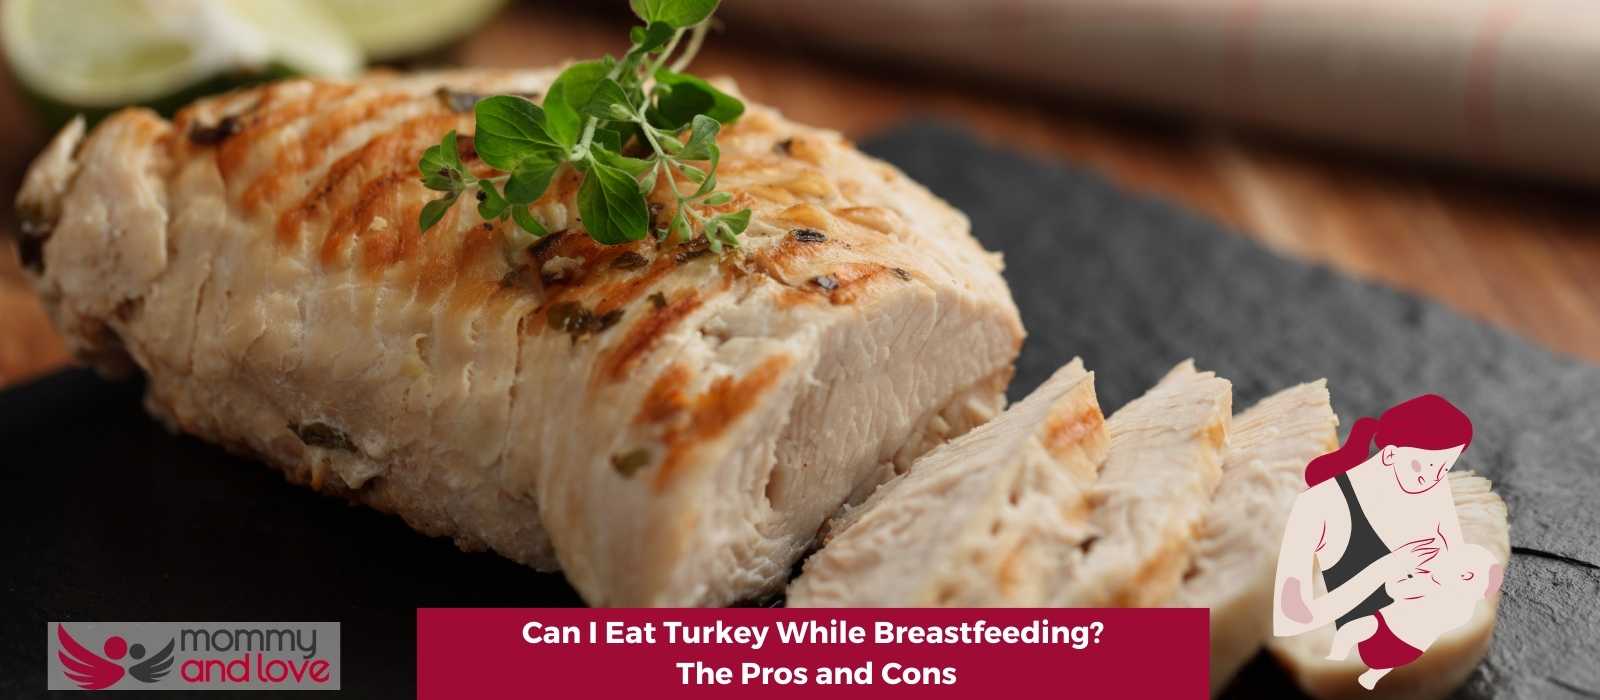 Can I Eat Turkey While Breastfeeding The Pros and Cons